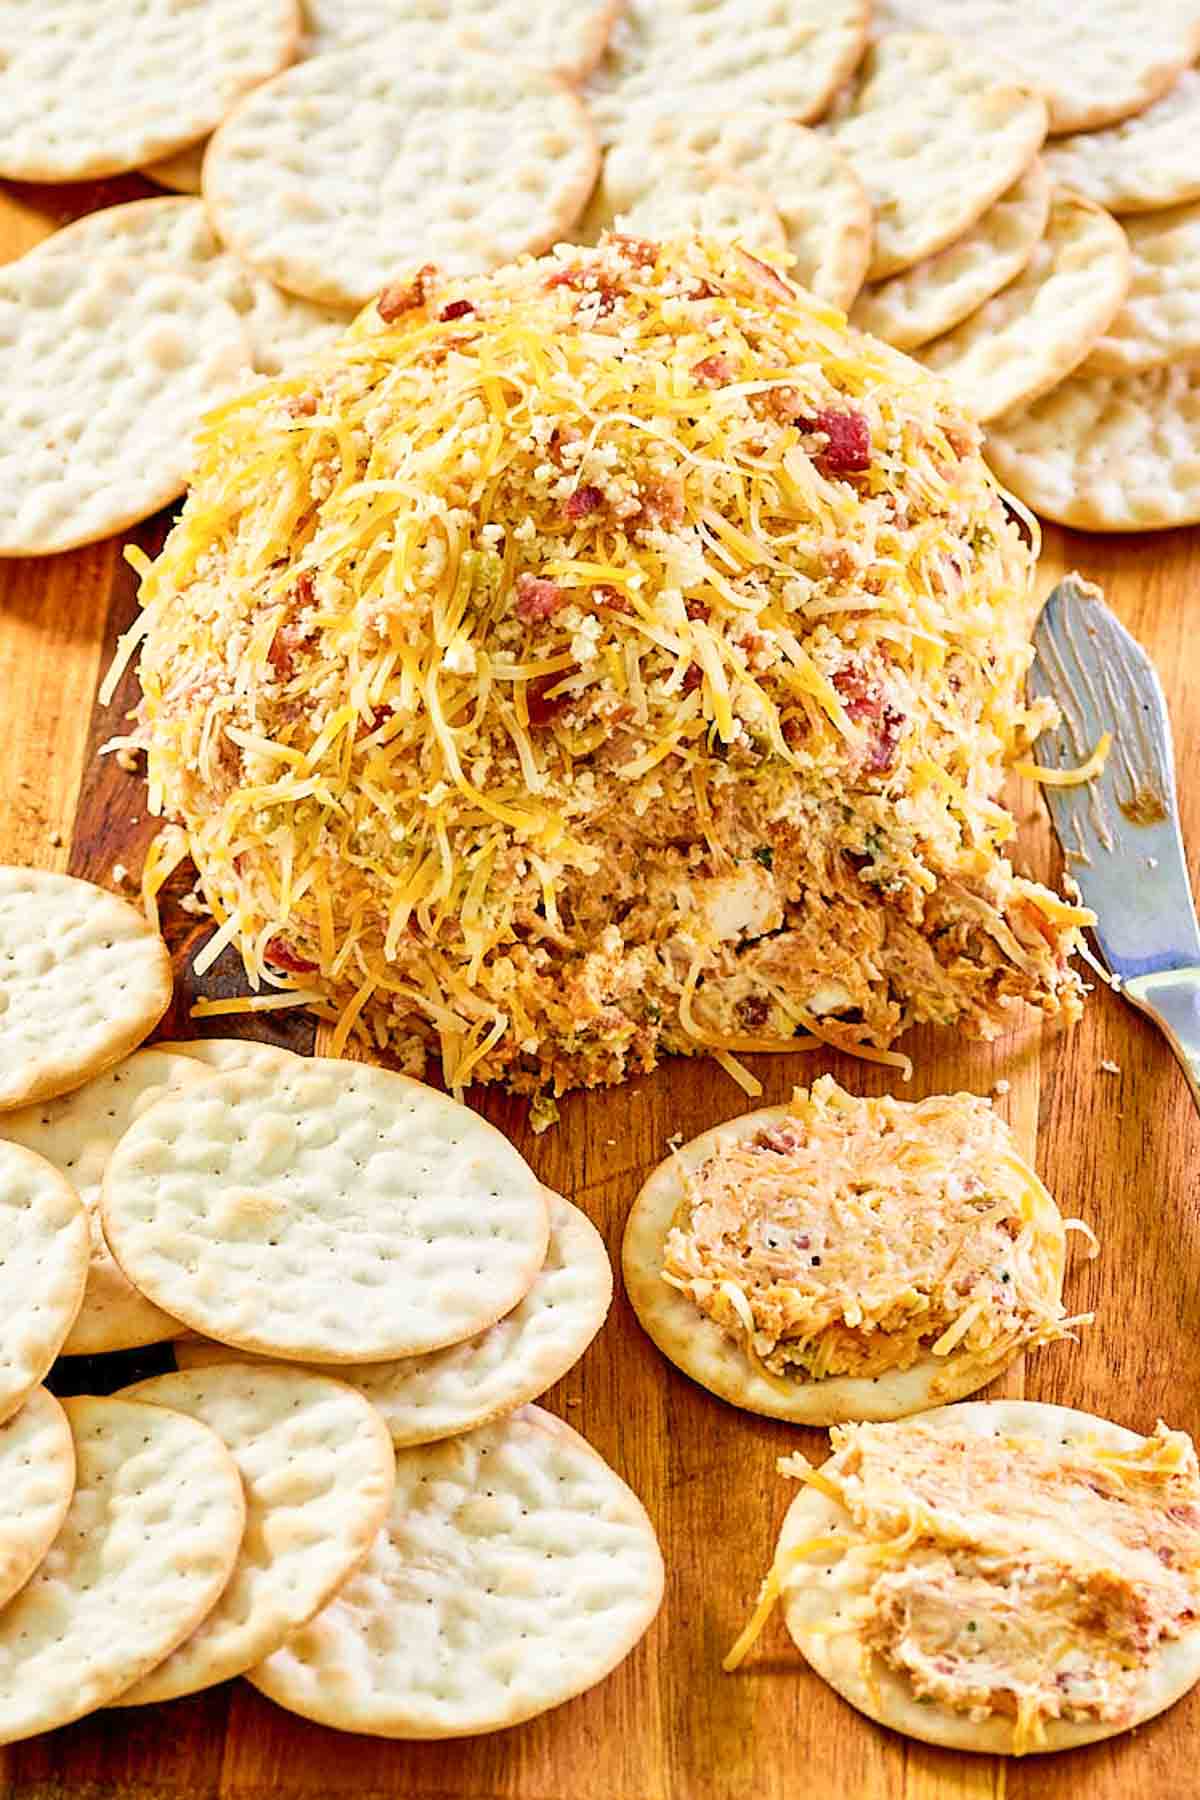 Jalapeno popper cheese ball with bacon and crackers on a wood board.